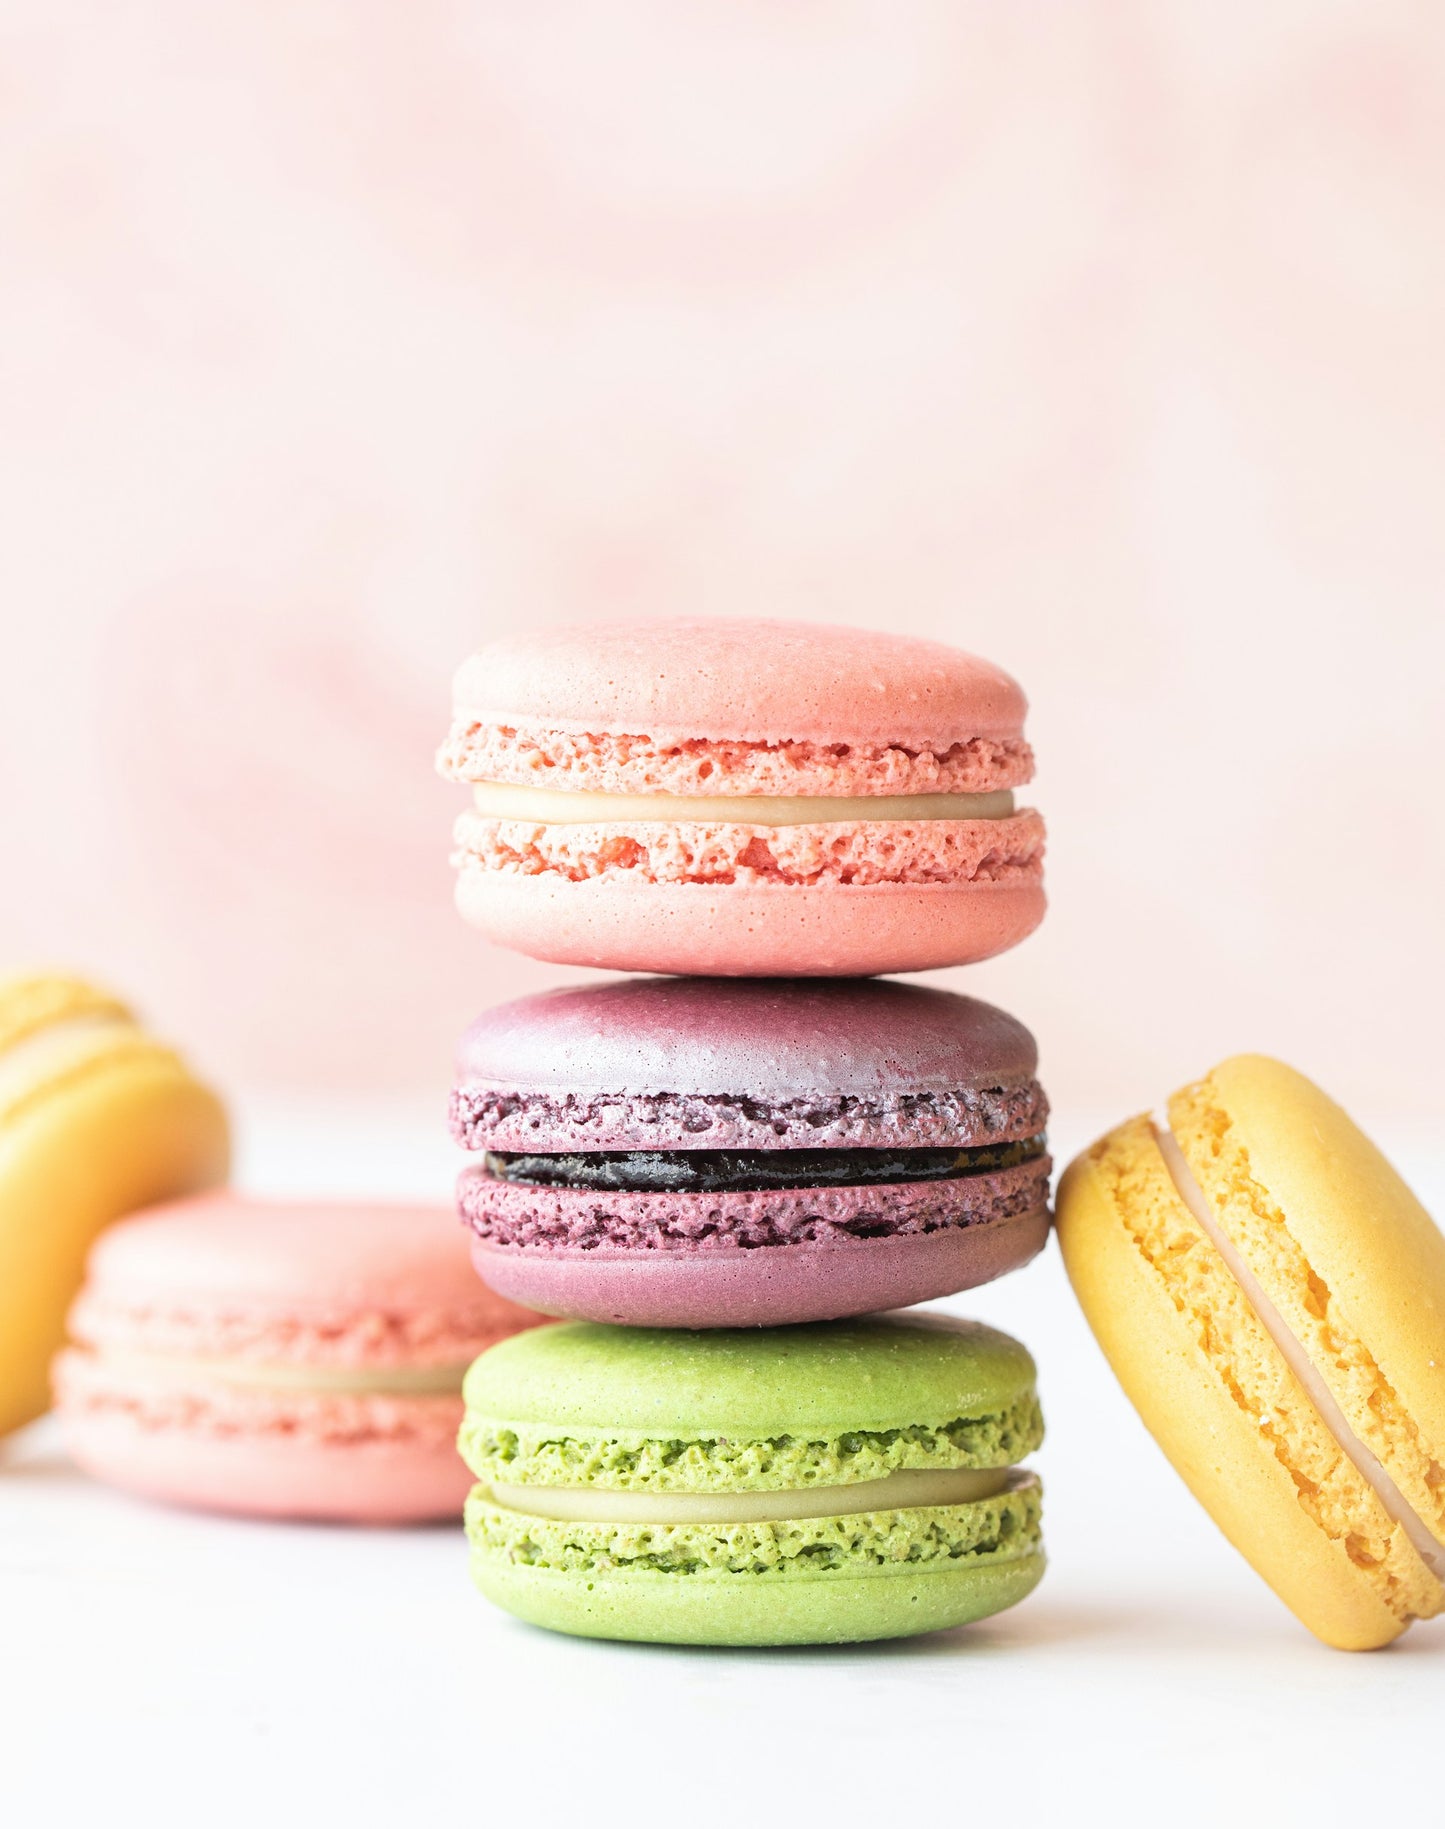 Learn to Make Amazing French Macarons